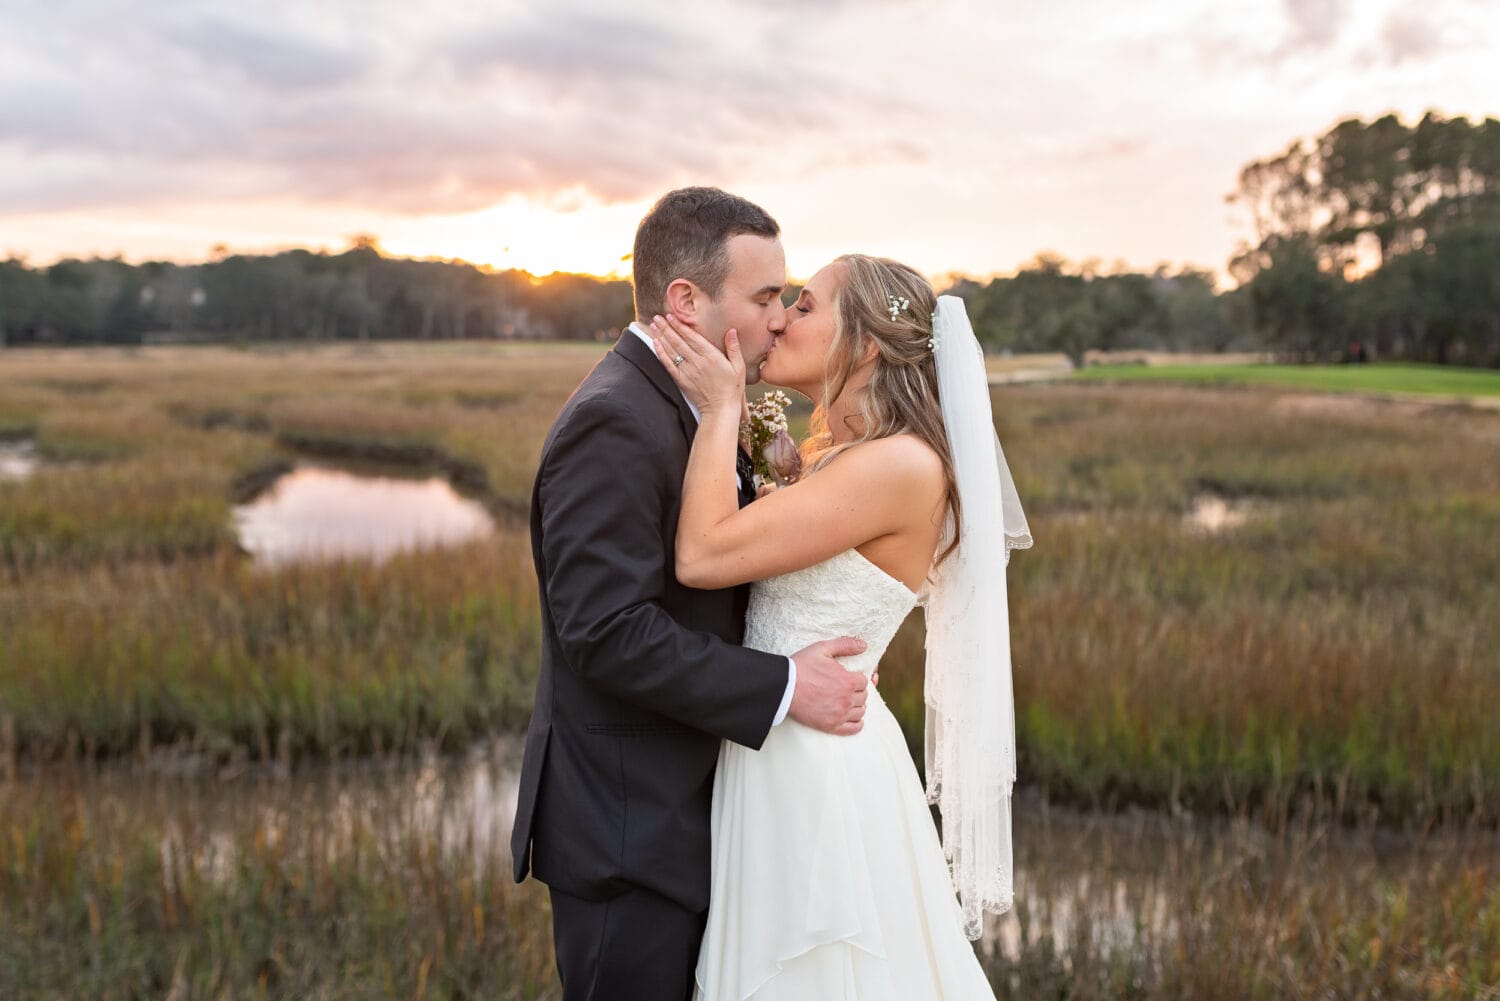 Pulling him in close for a kiss - Pawleys Plantation Golf & Country Club